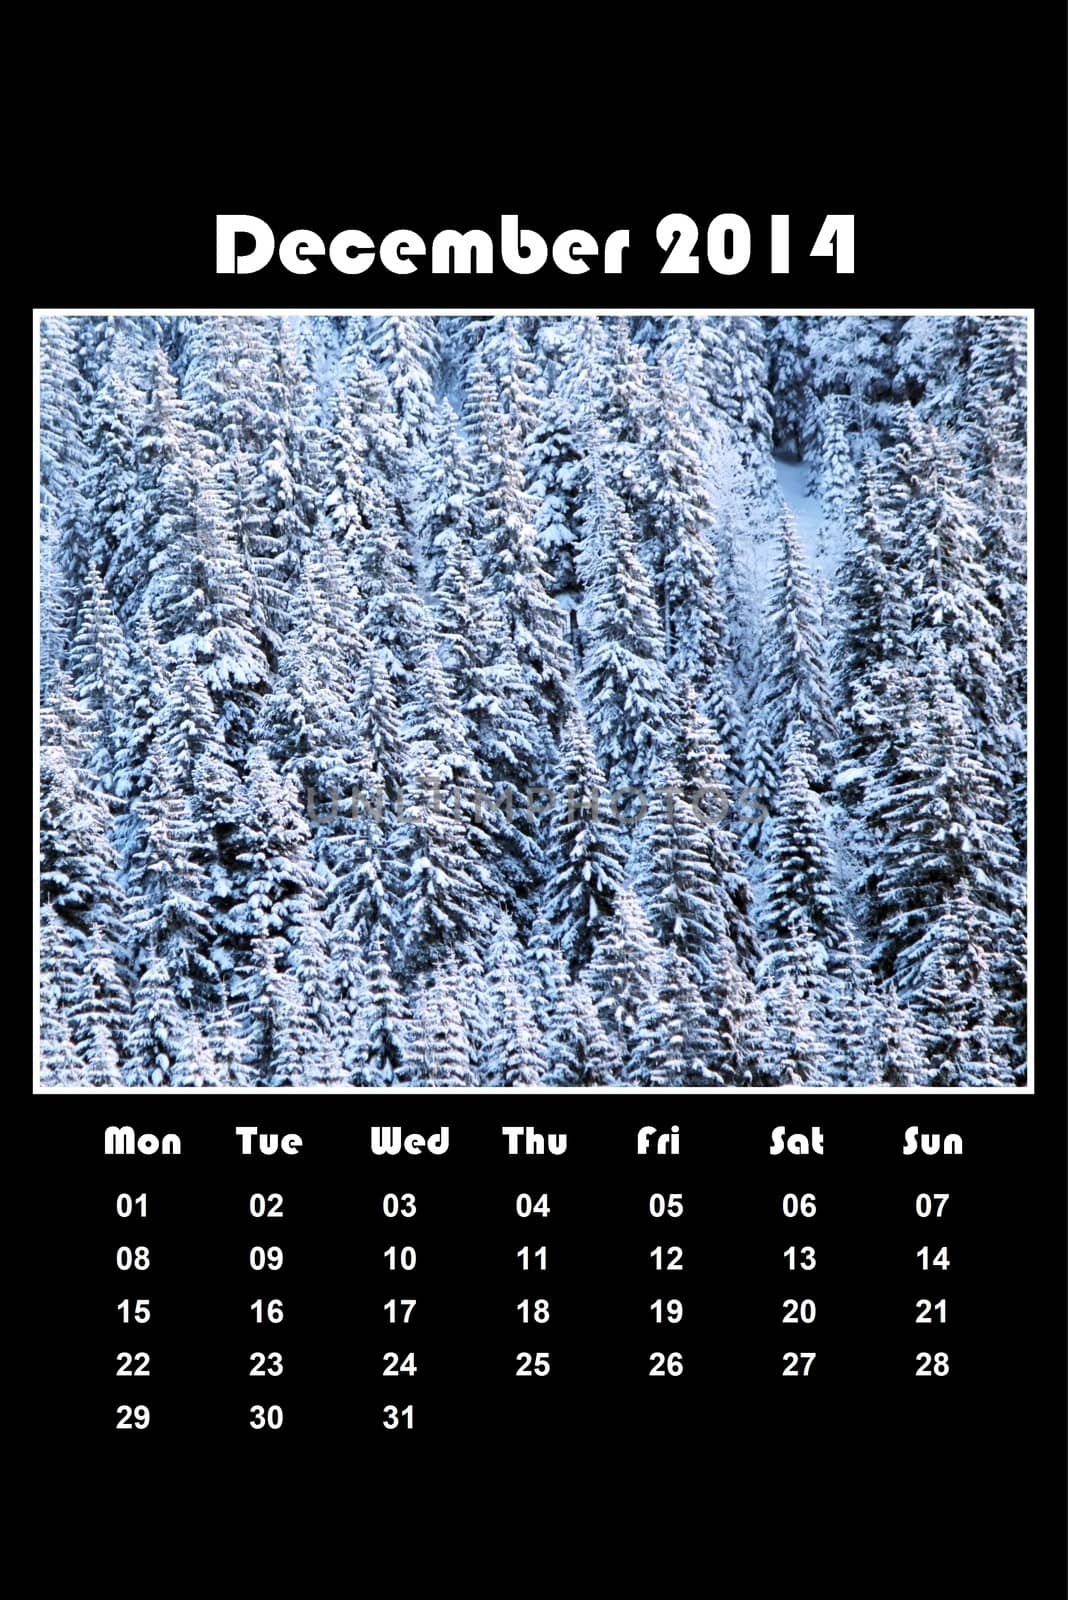 Colorful english calendar for december 2014 in black background, fir trees forest covered with snow